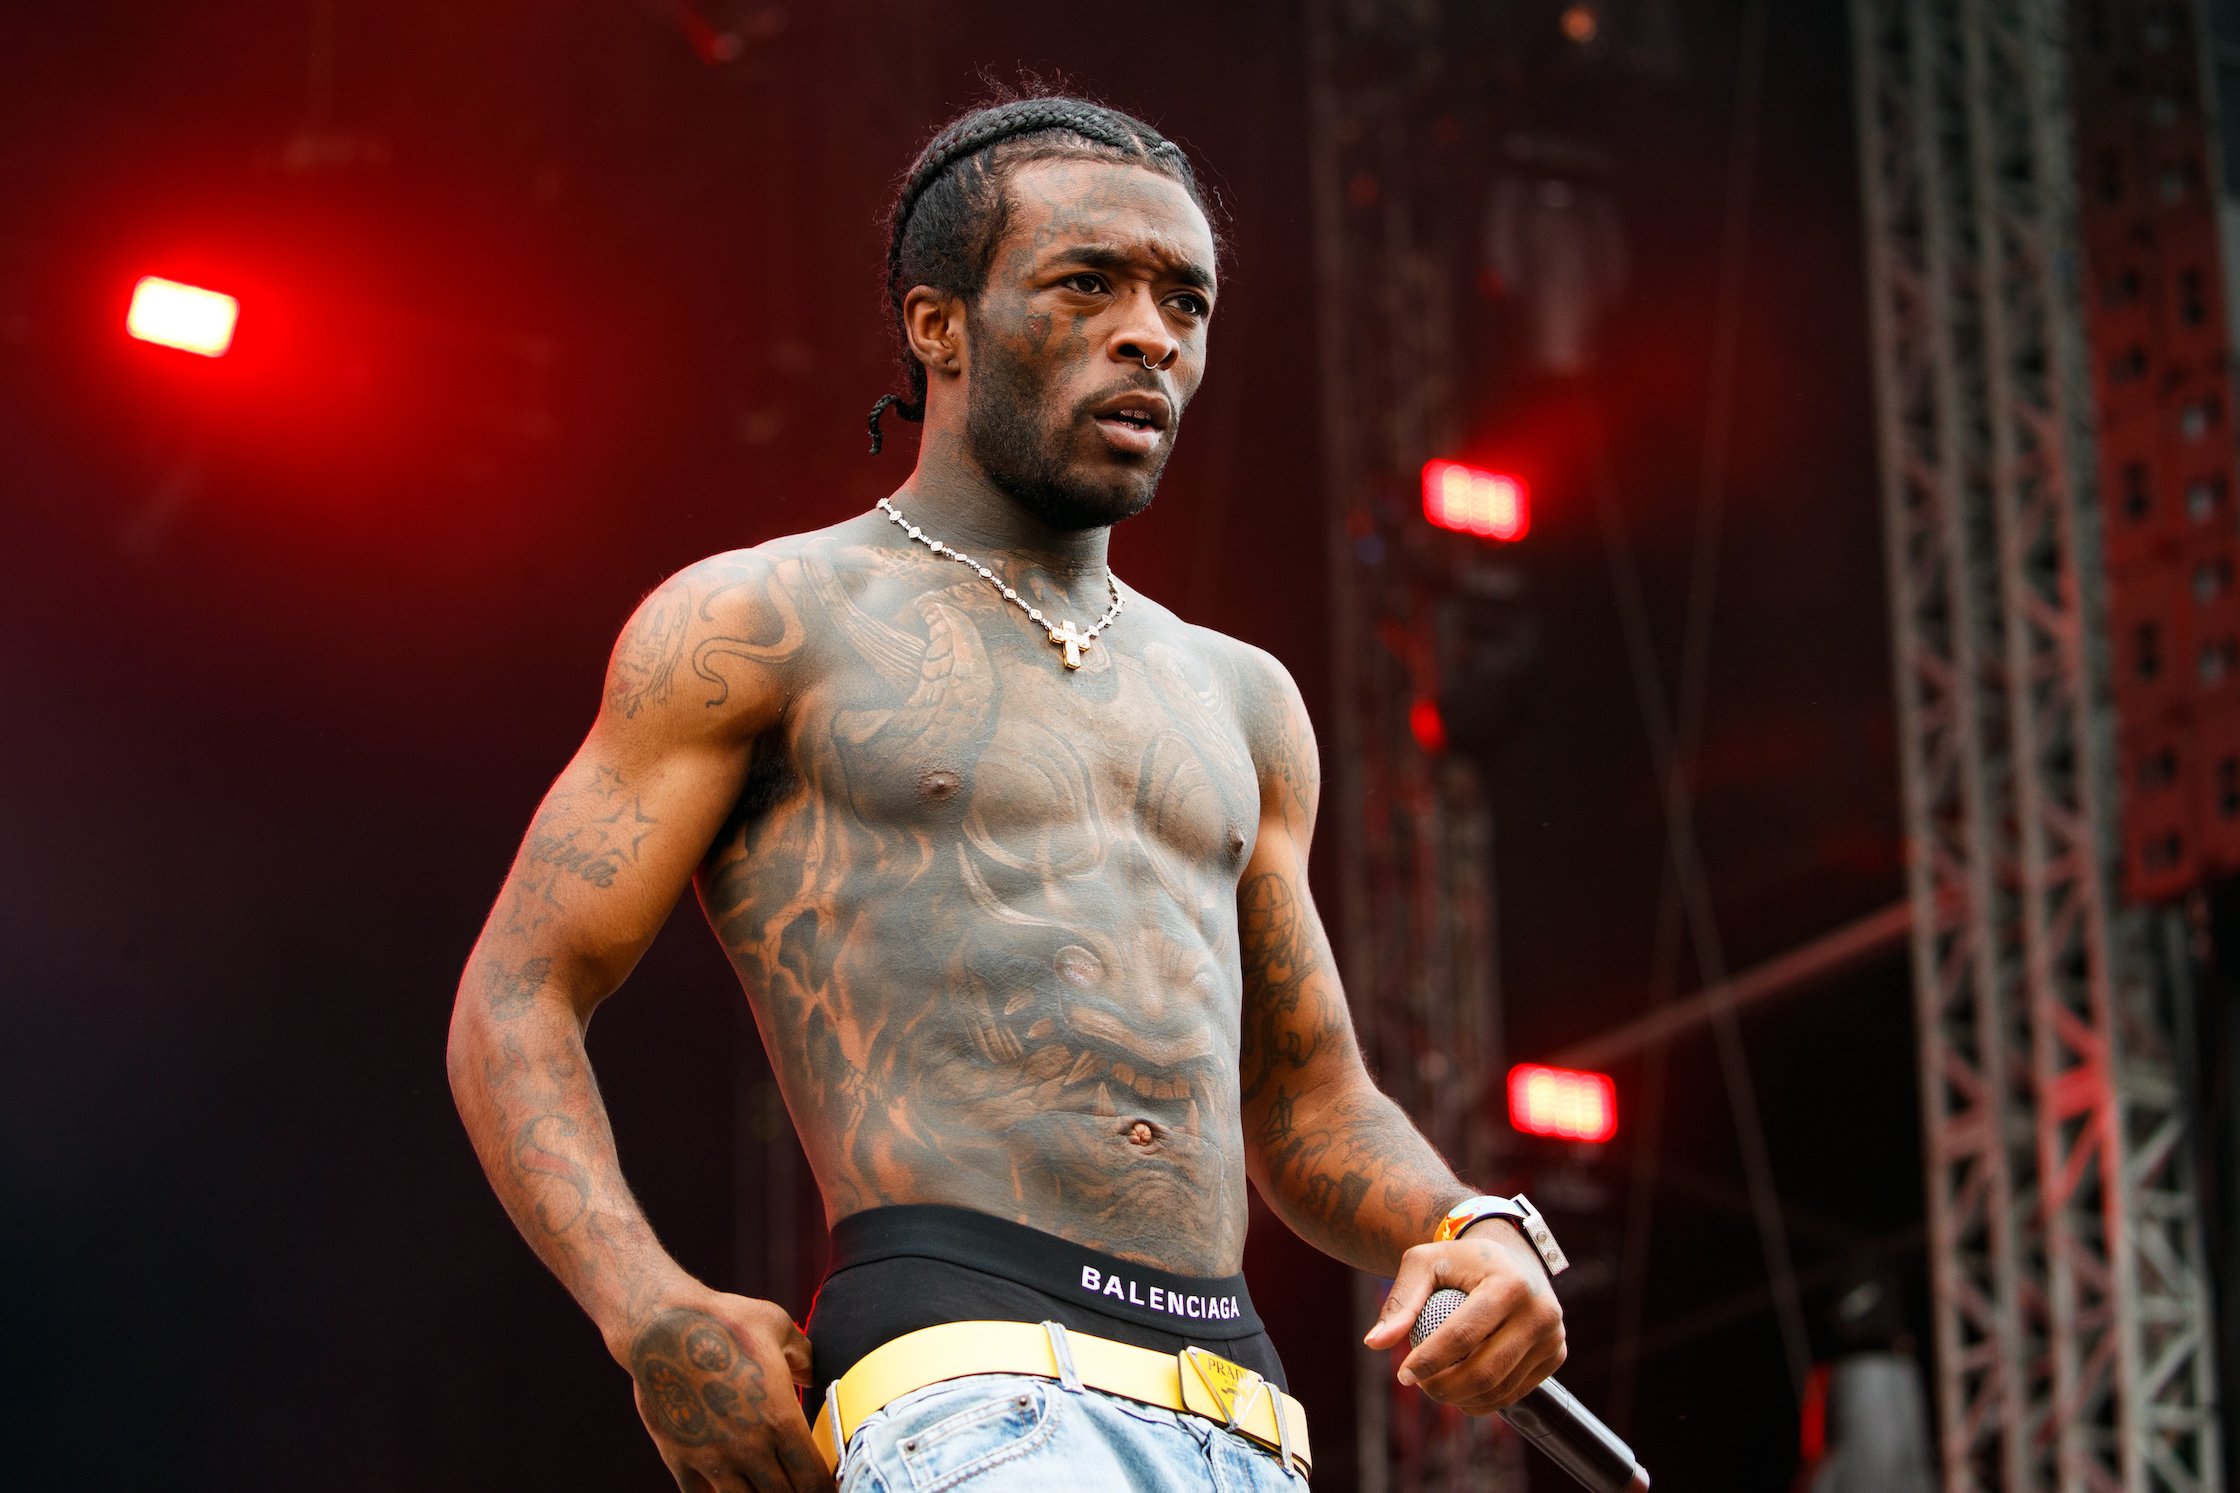 Lil Uzi Vert performs on day 1 of Wireless Festival 2022 at Crystal Palace Park